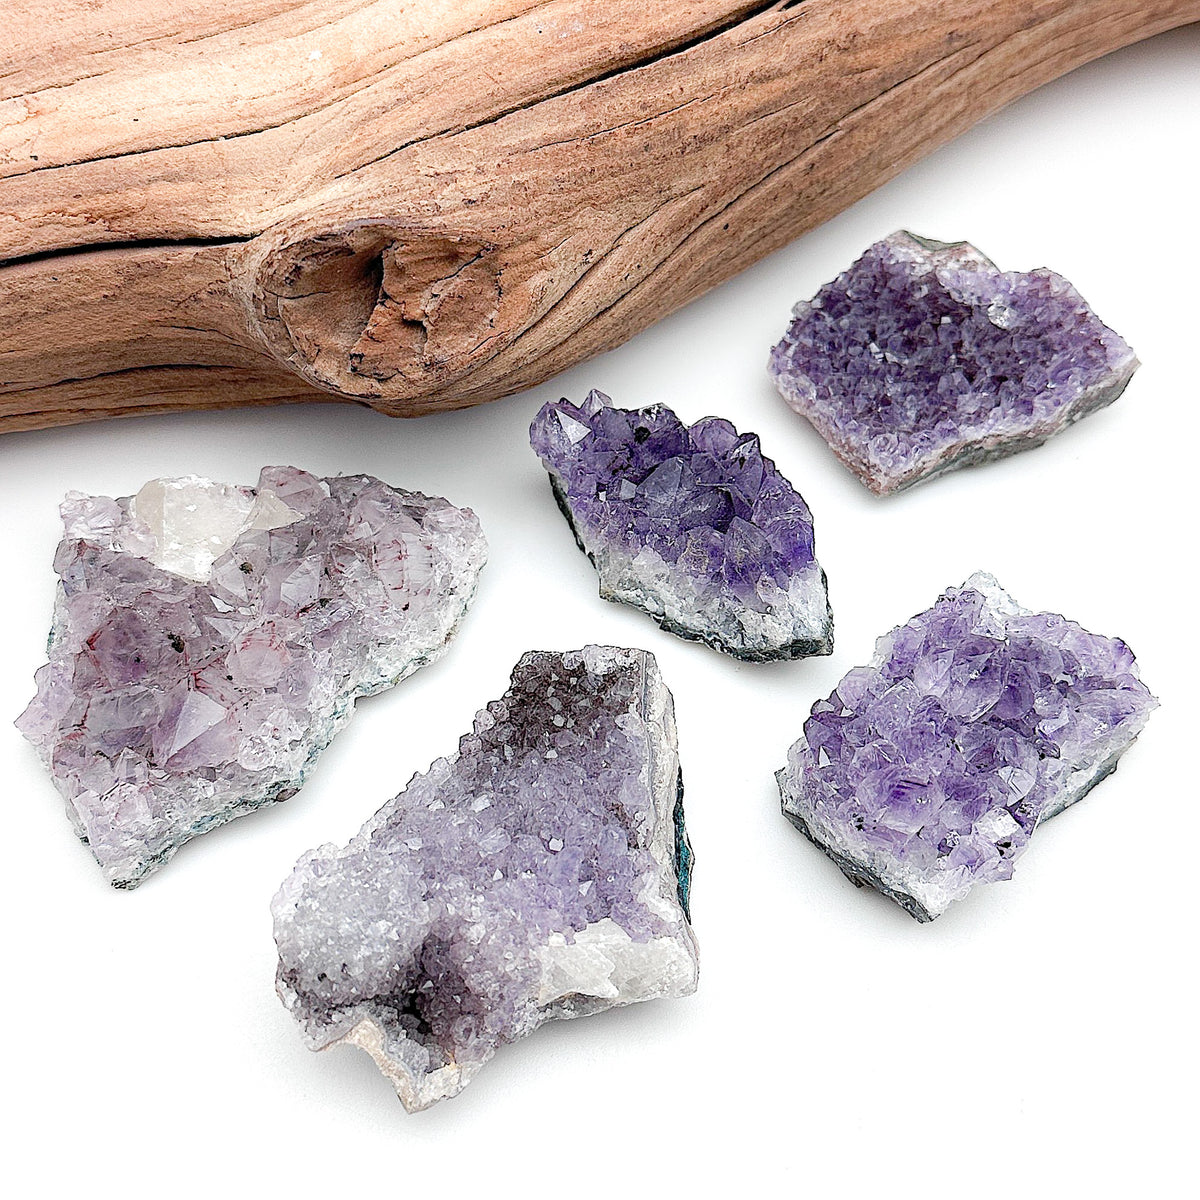 Amethyst geode clusters of various sizes and hues laid together on a white background